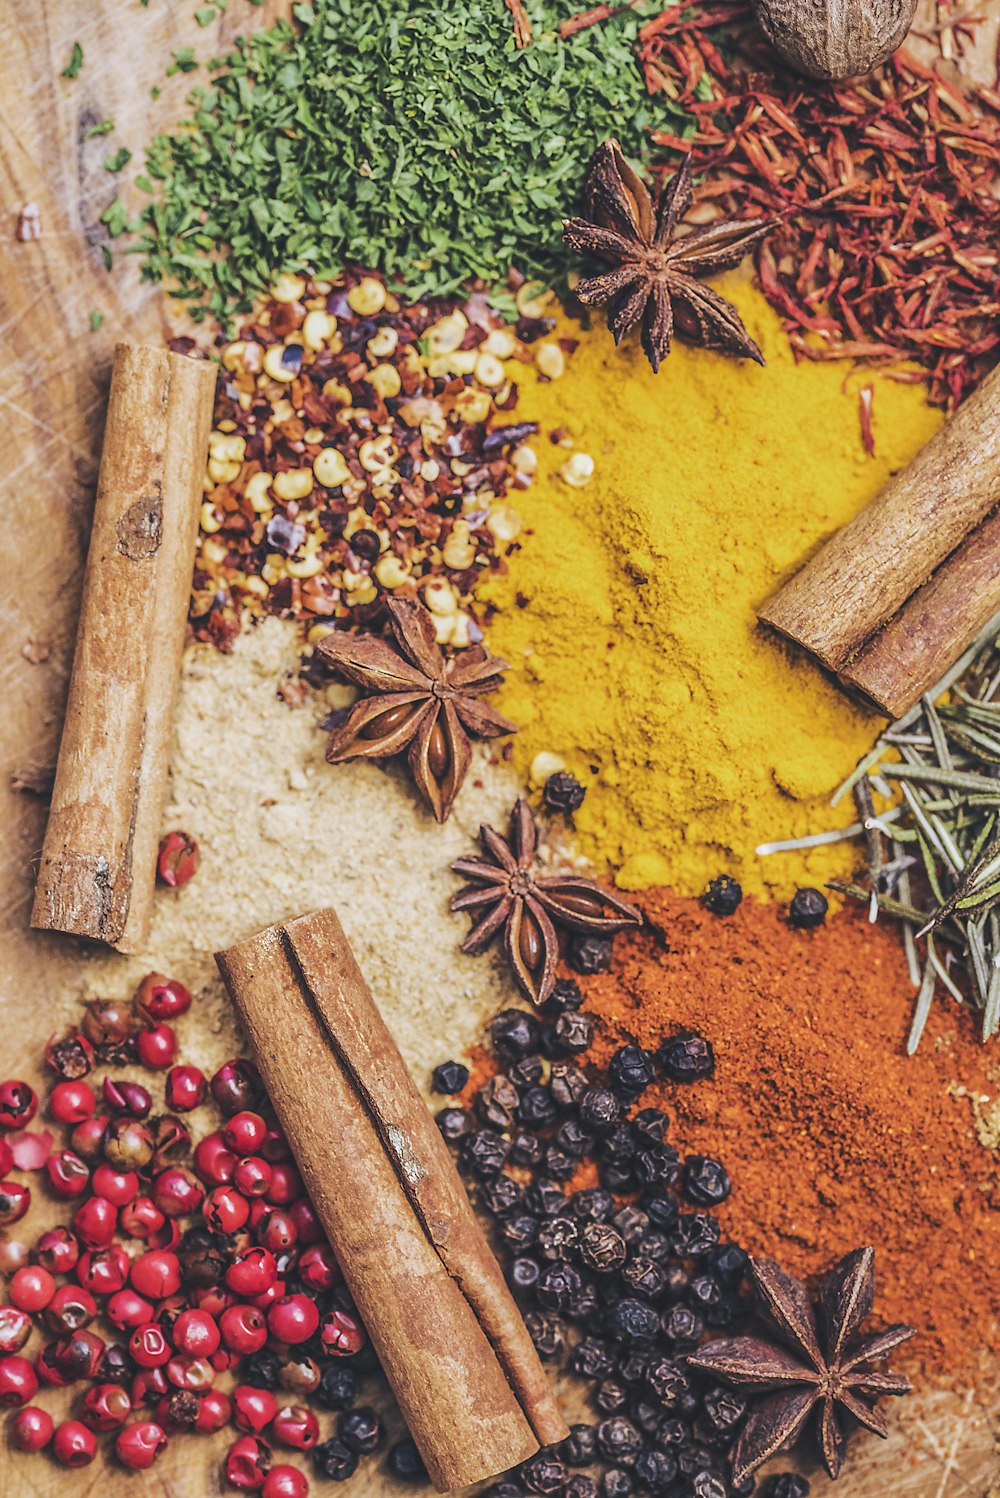 27+ Spice Pictures | Download Free Images on Unsplash